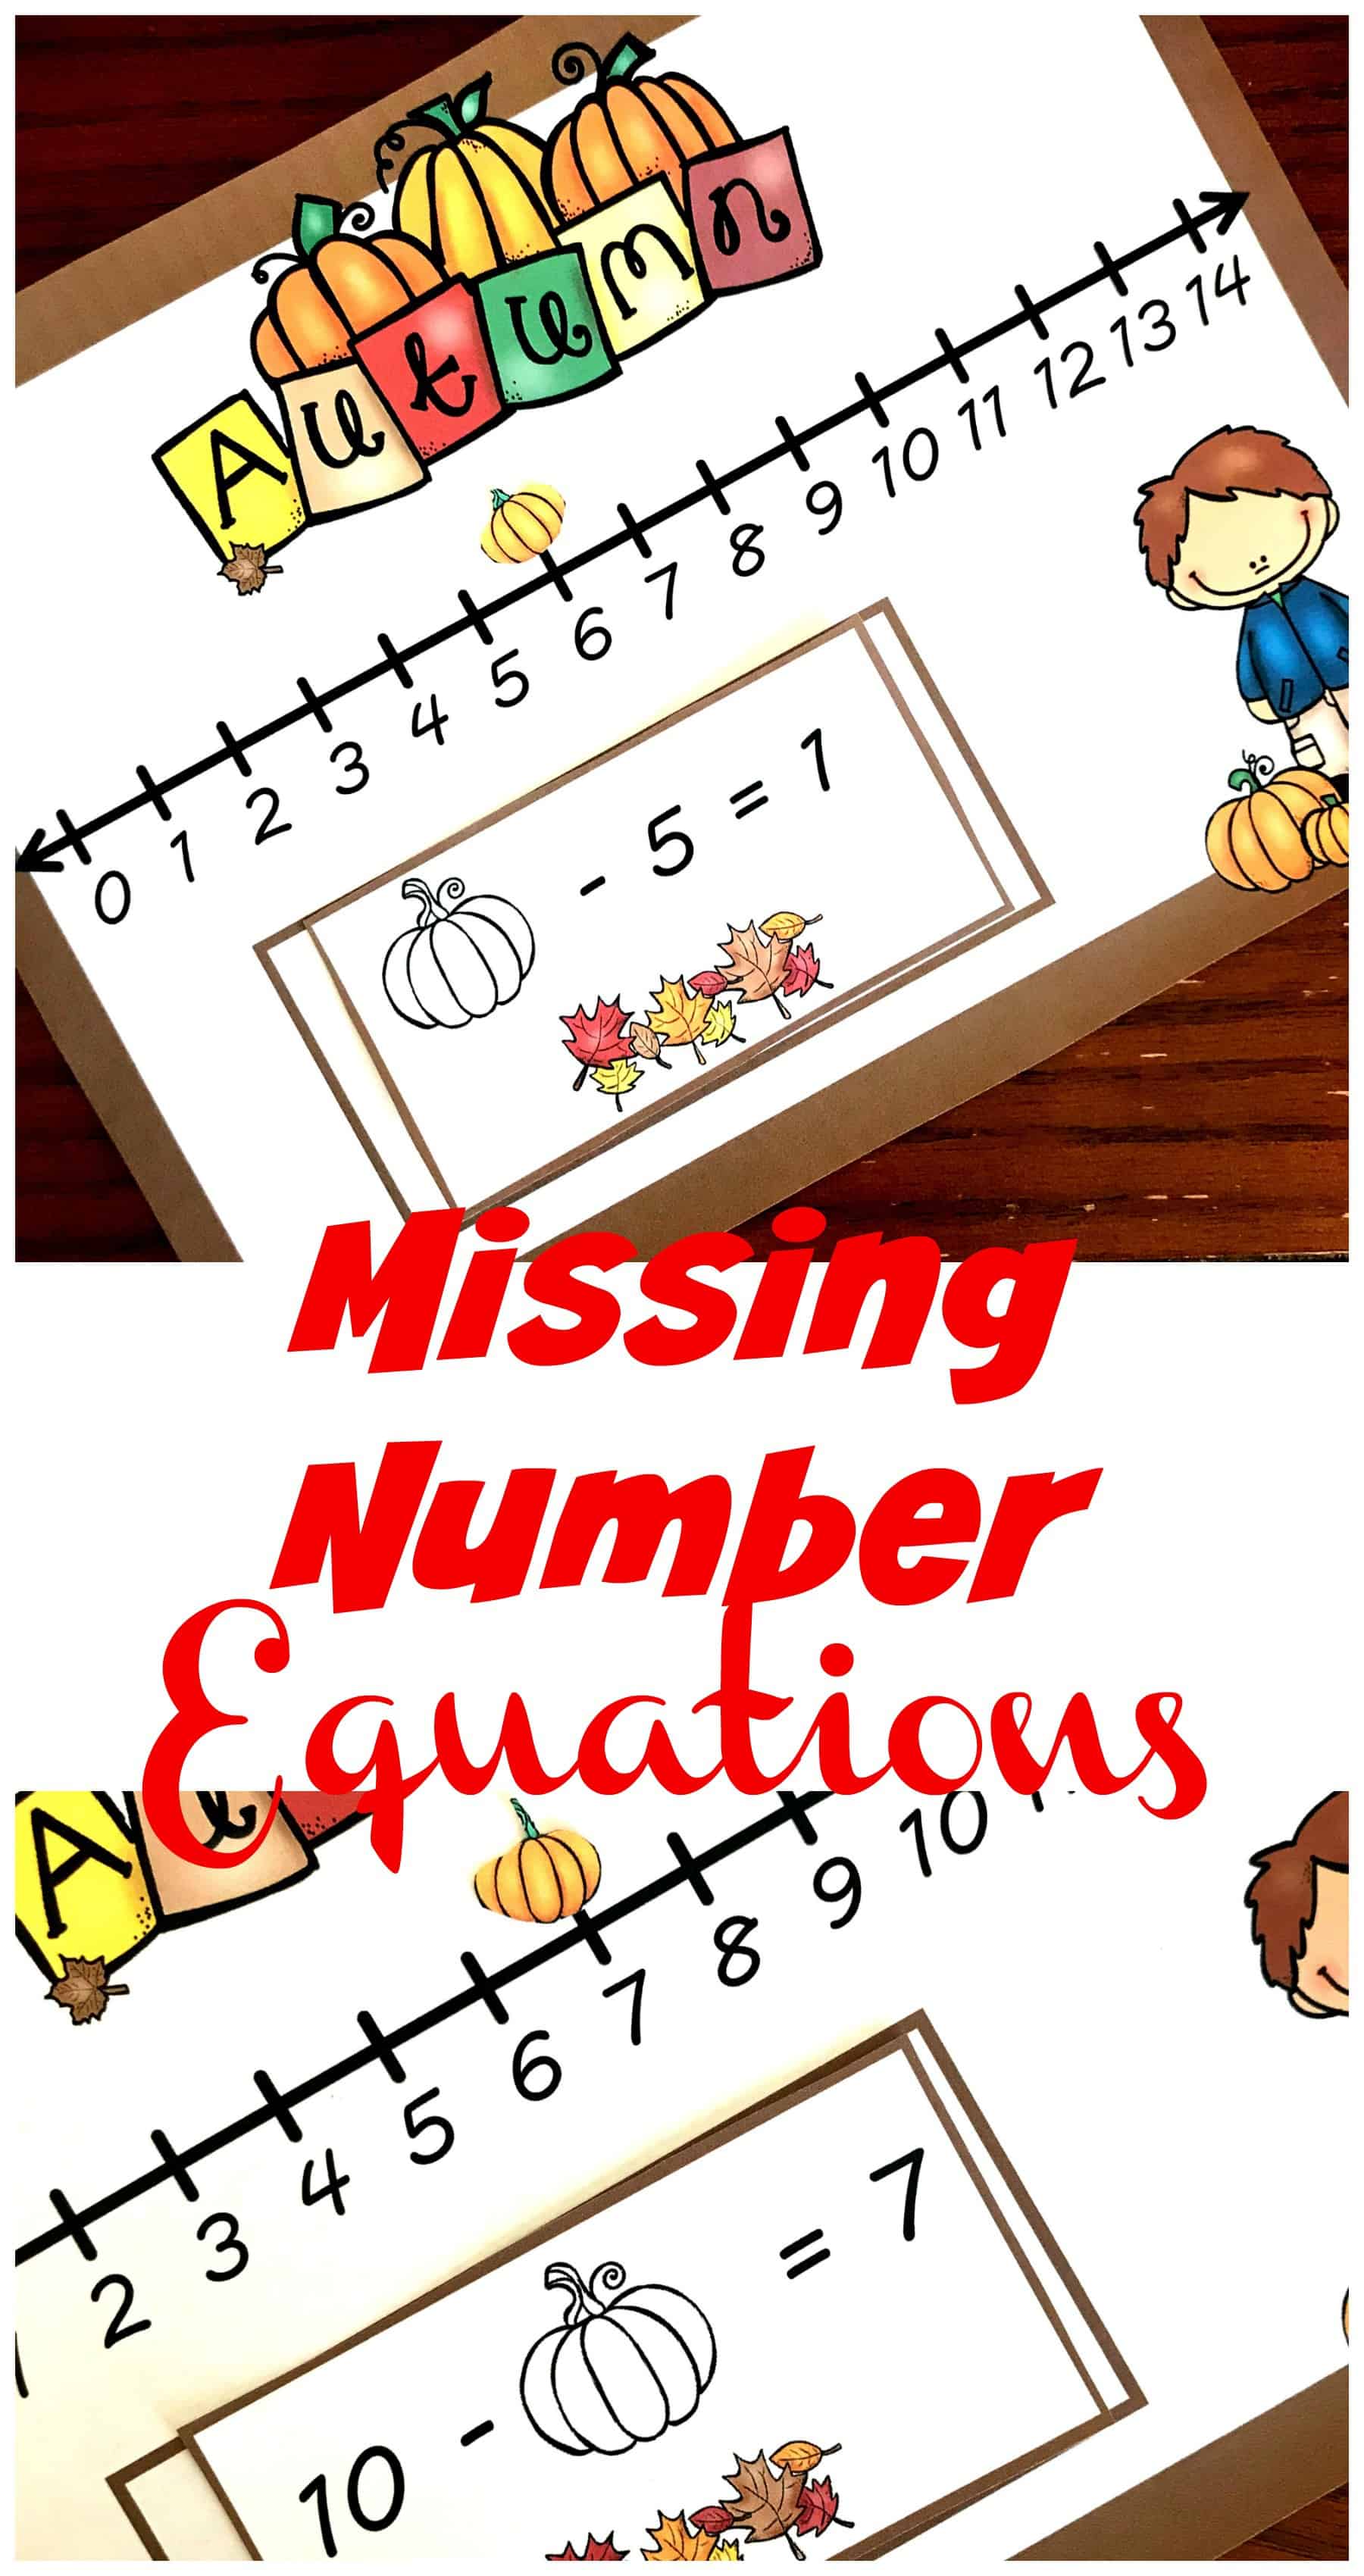 Fill in the Missing Number worksheet.